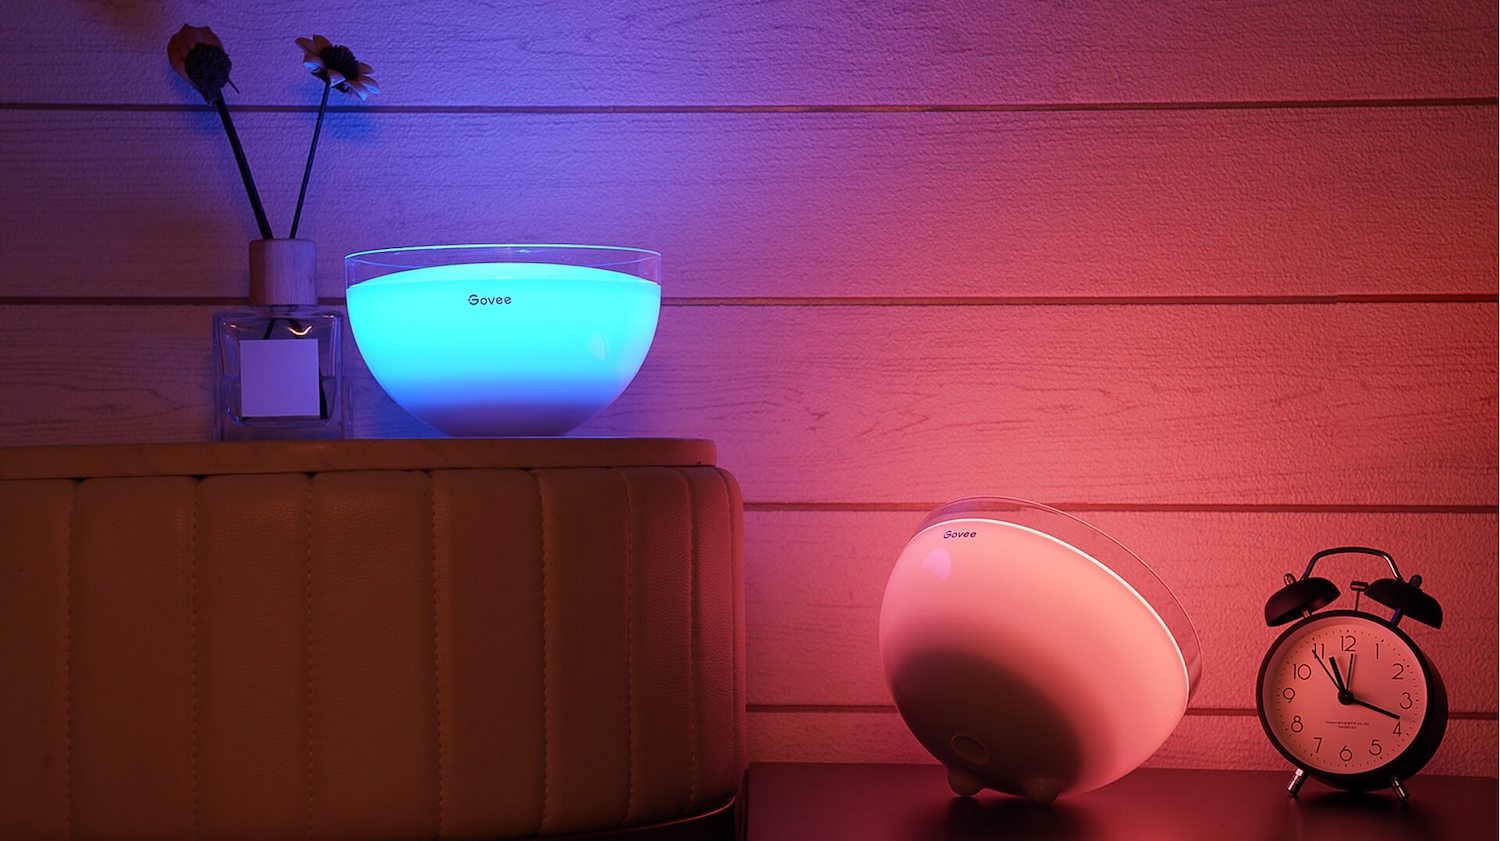 Govee Wi-Fi smart plugs automate lights for $30, more